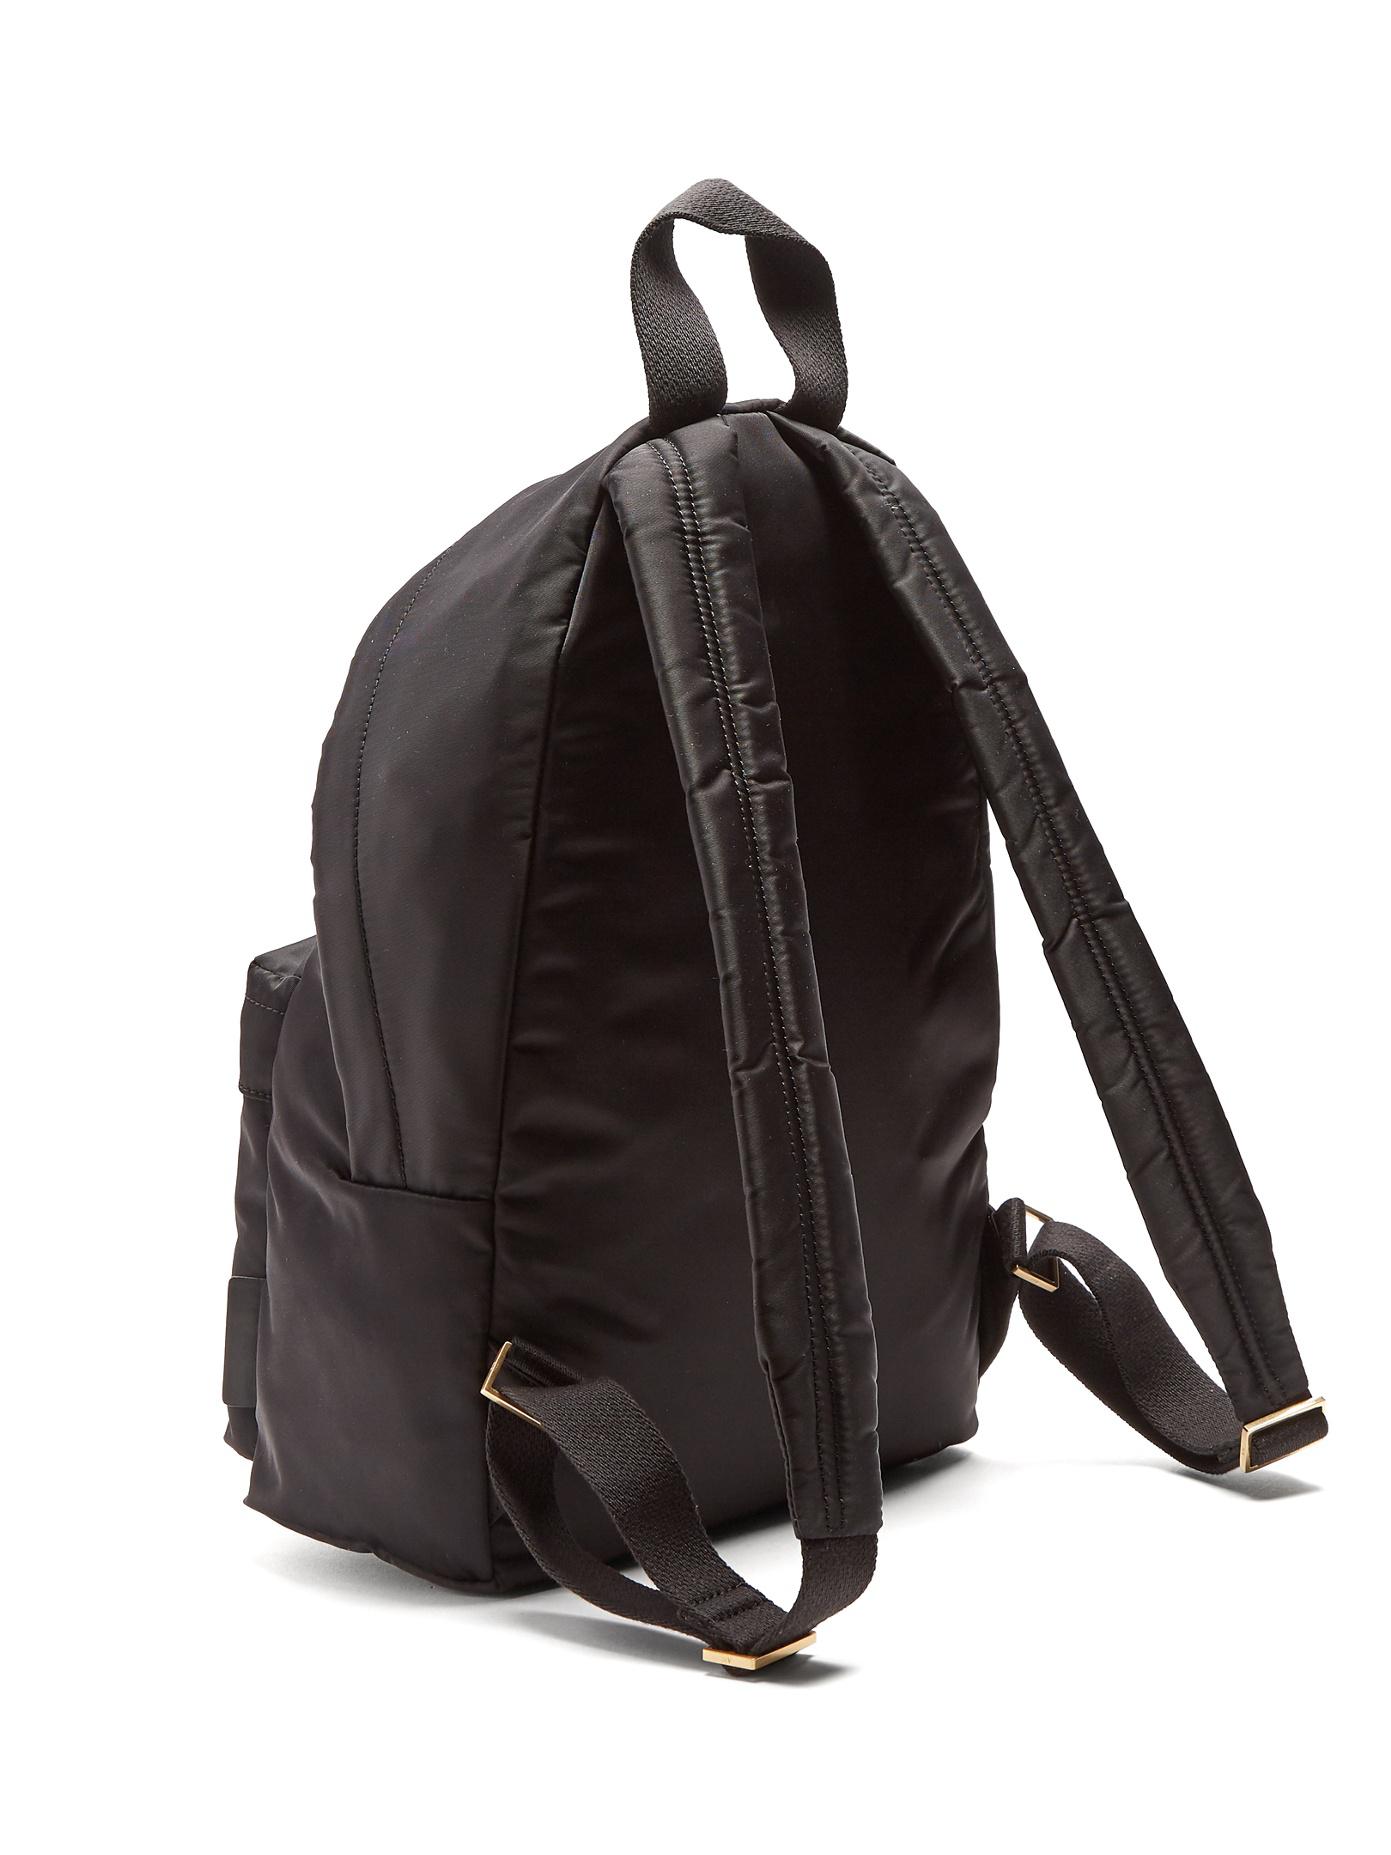 Anya Hindmarch Synthetic Eyes Nylon Backpack in Black - Lyst